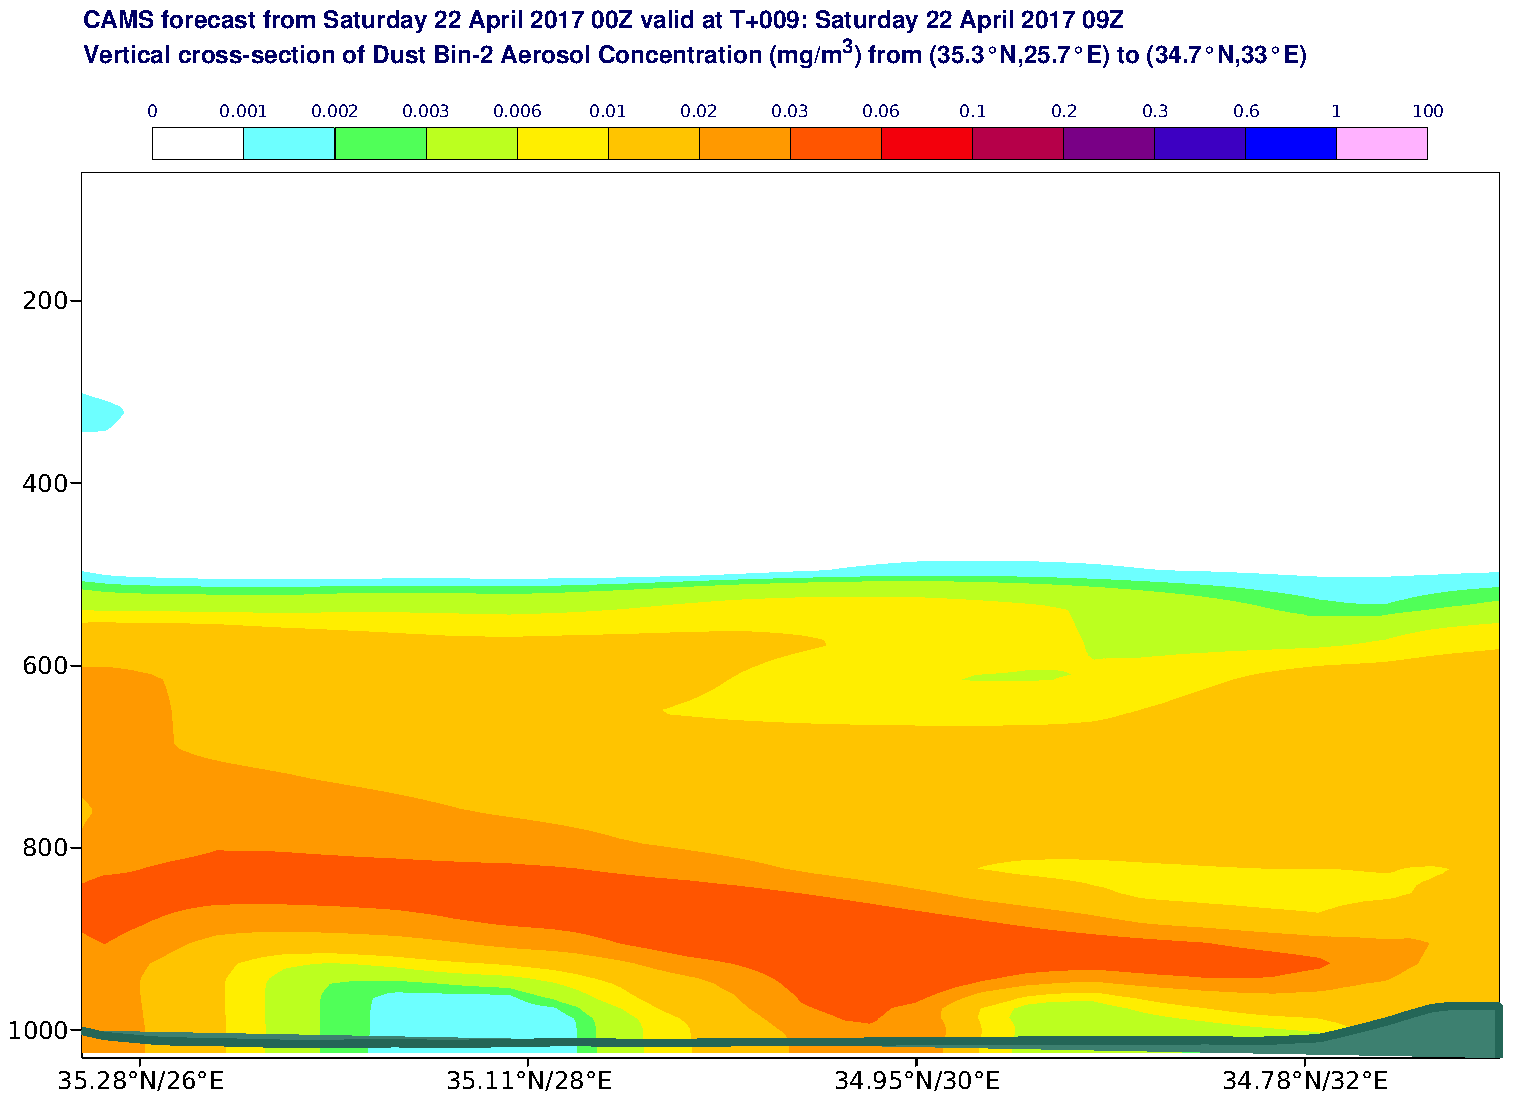 Vertical cross-section of Dust Bin-2 Aerosol Concentration (mg/m3) valid at T9 - 2017-04-22 09:00